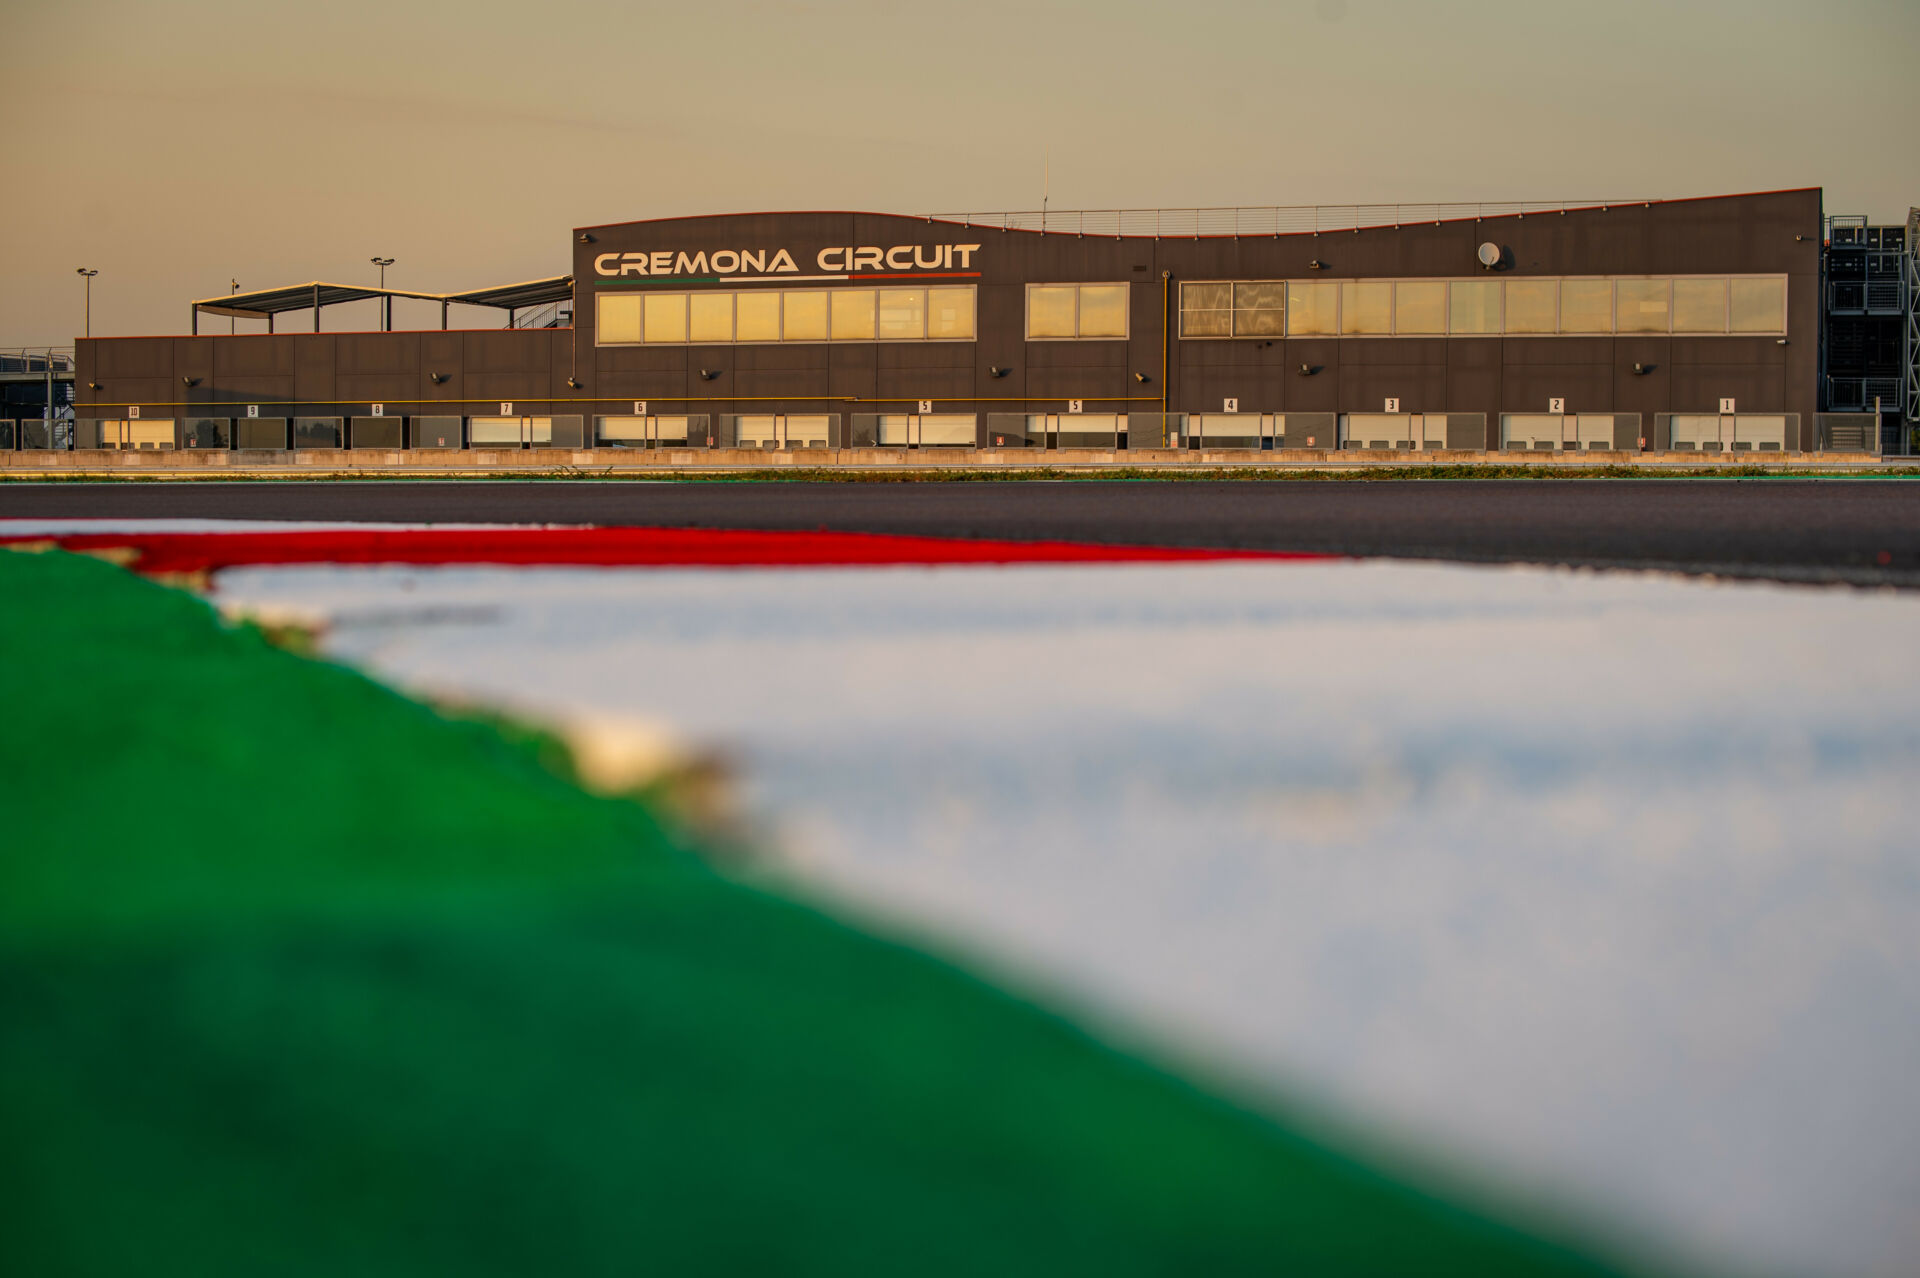 The Cremona Circuit near Milan, Italy, will host the Superbike World Championship for the next five years, pending homologation approval. Photo courtesy Dorna.